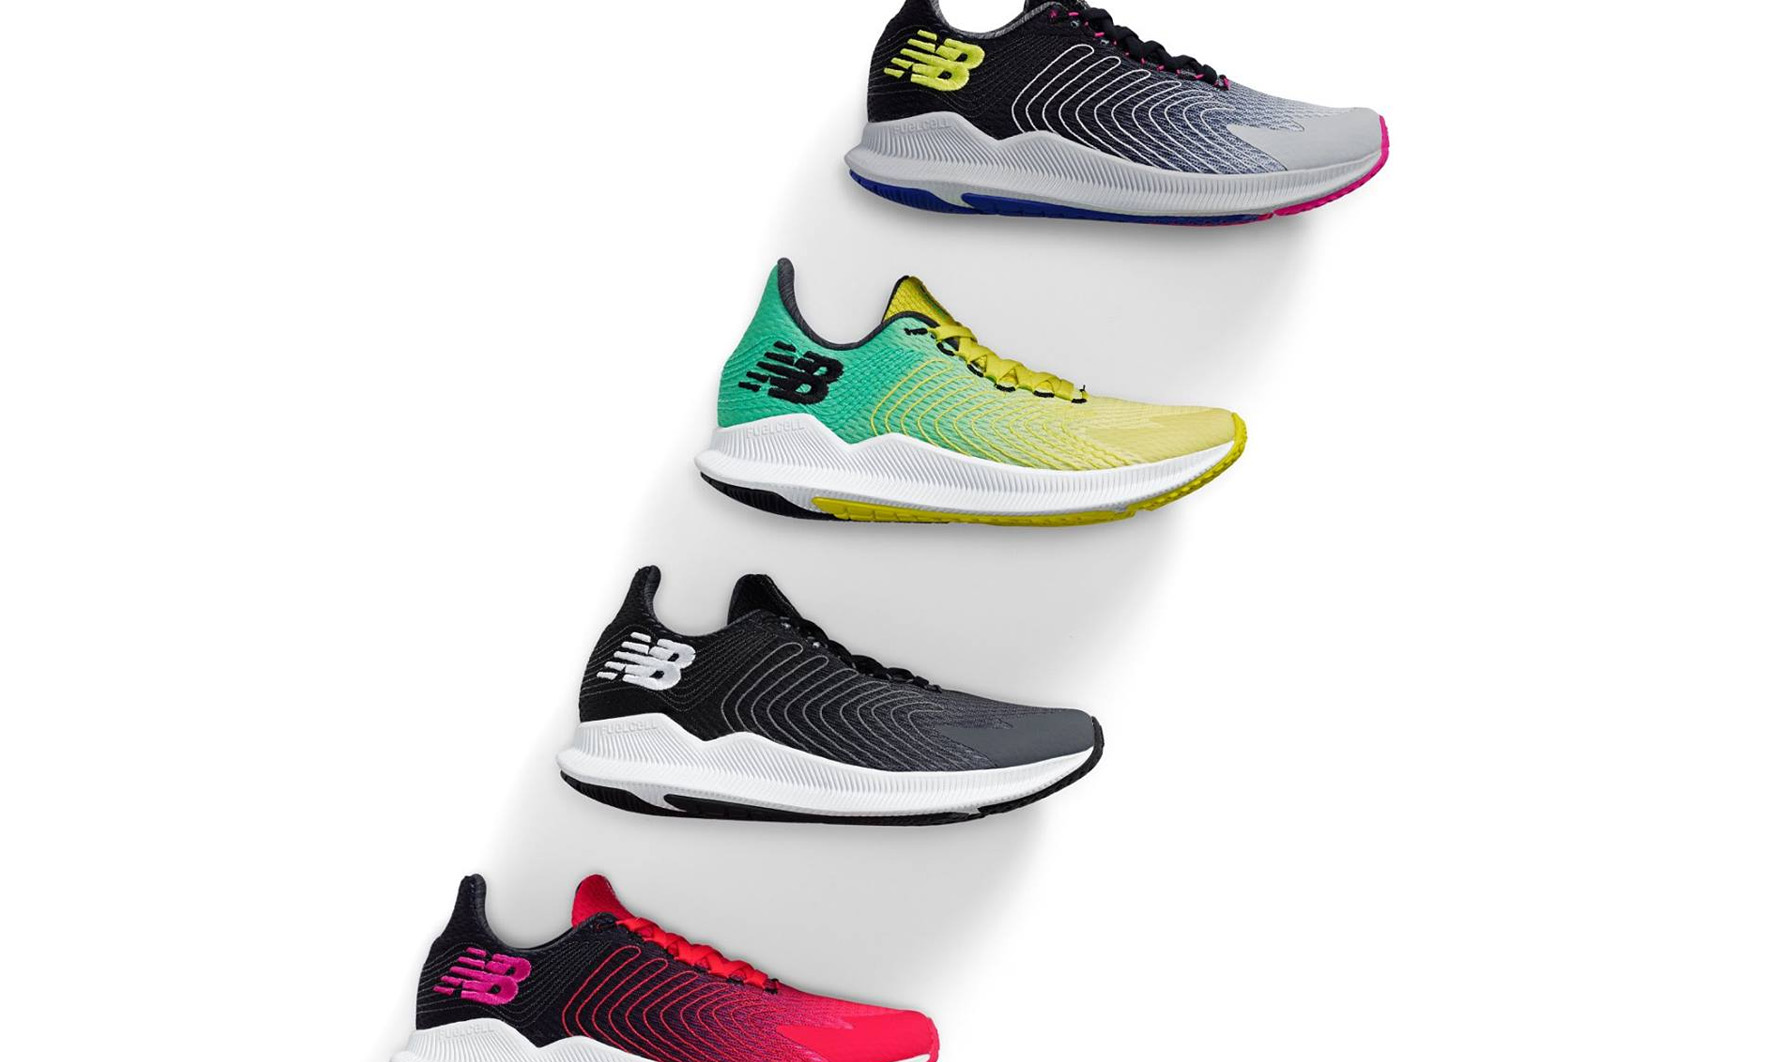 New Balance Semi-Annual Sale offers up 